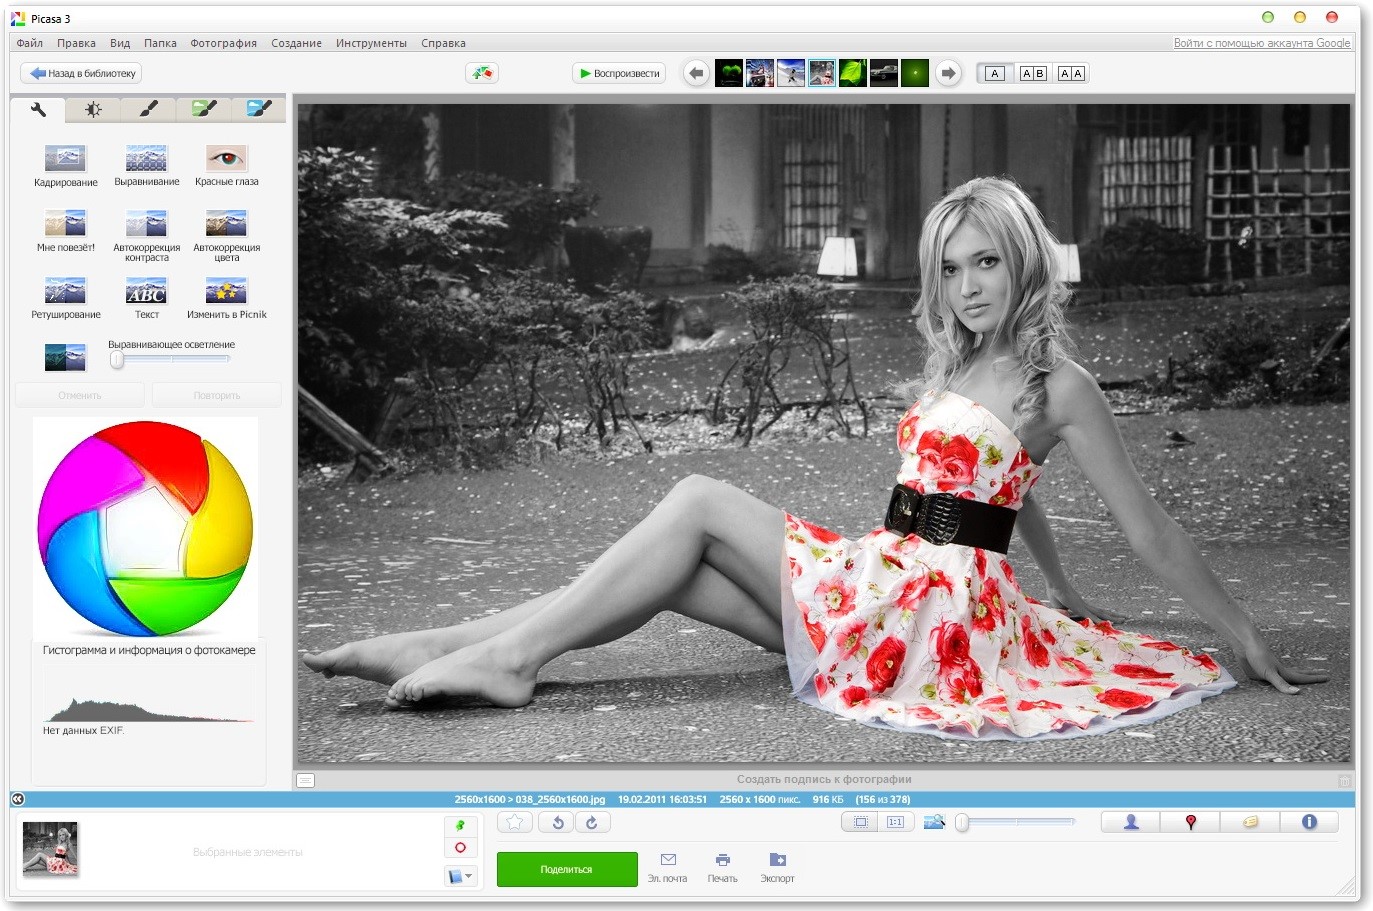 Lunarship Software – Phototheca Review : The Best Photo Management Software